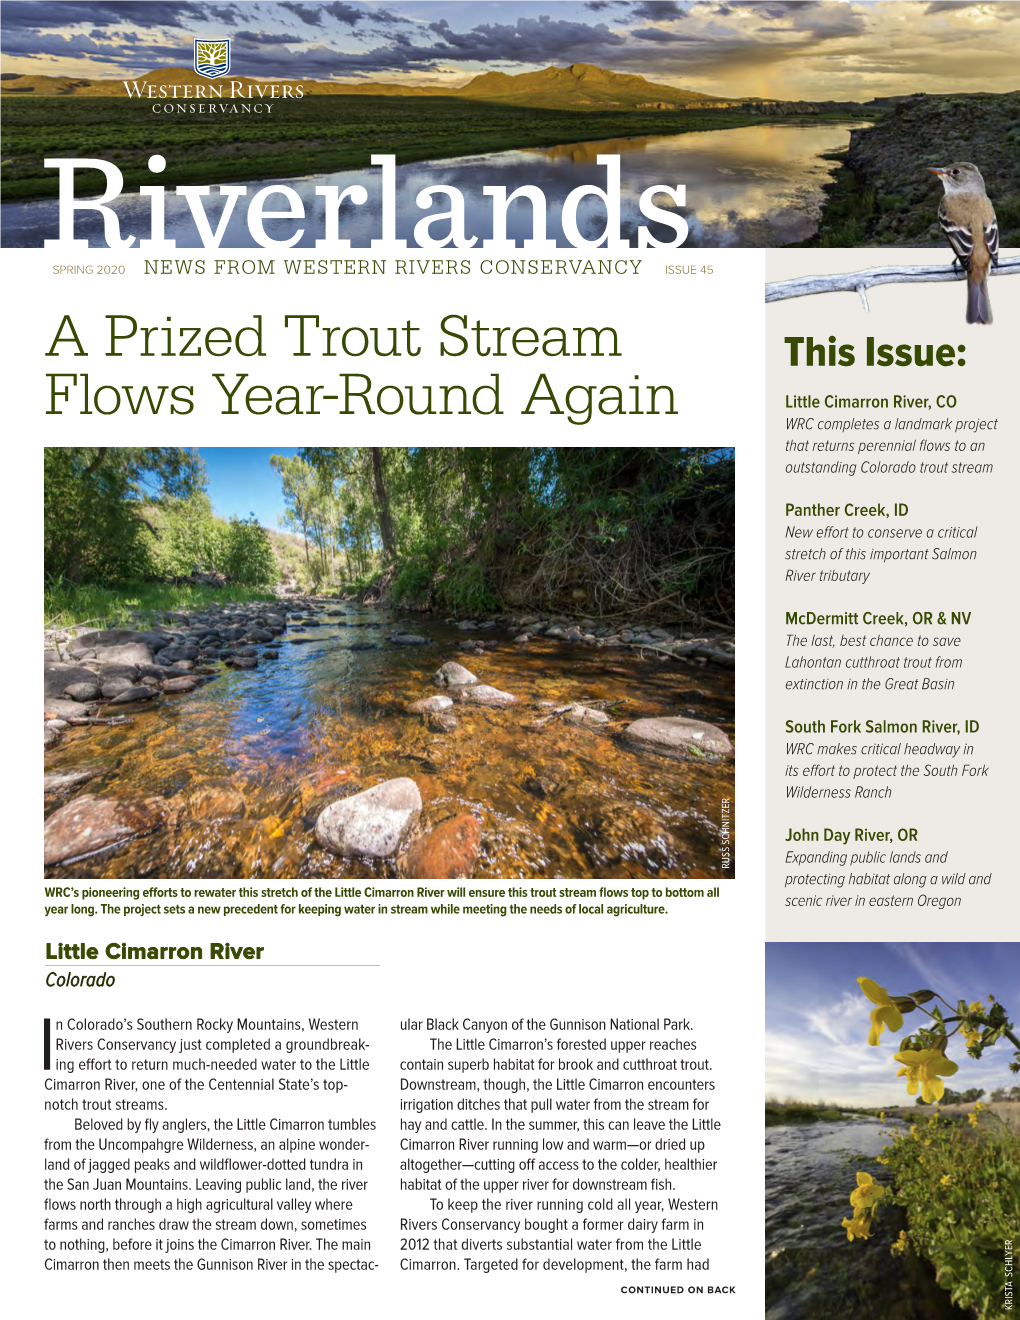 A Prized Trout Stream Flows Year-Round Again